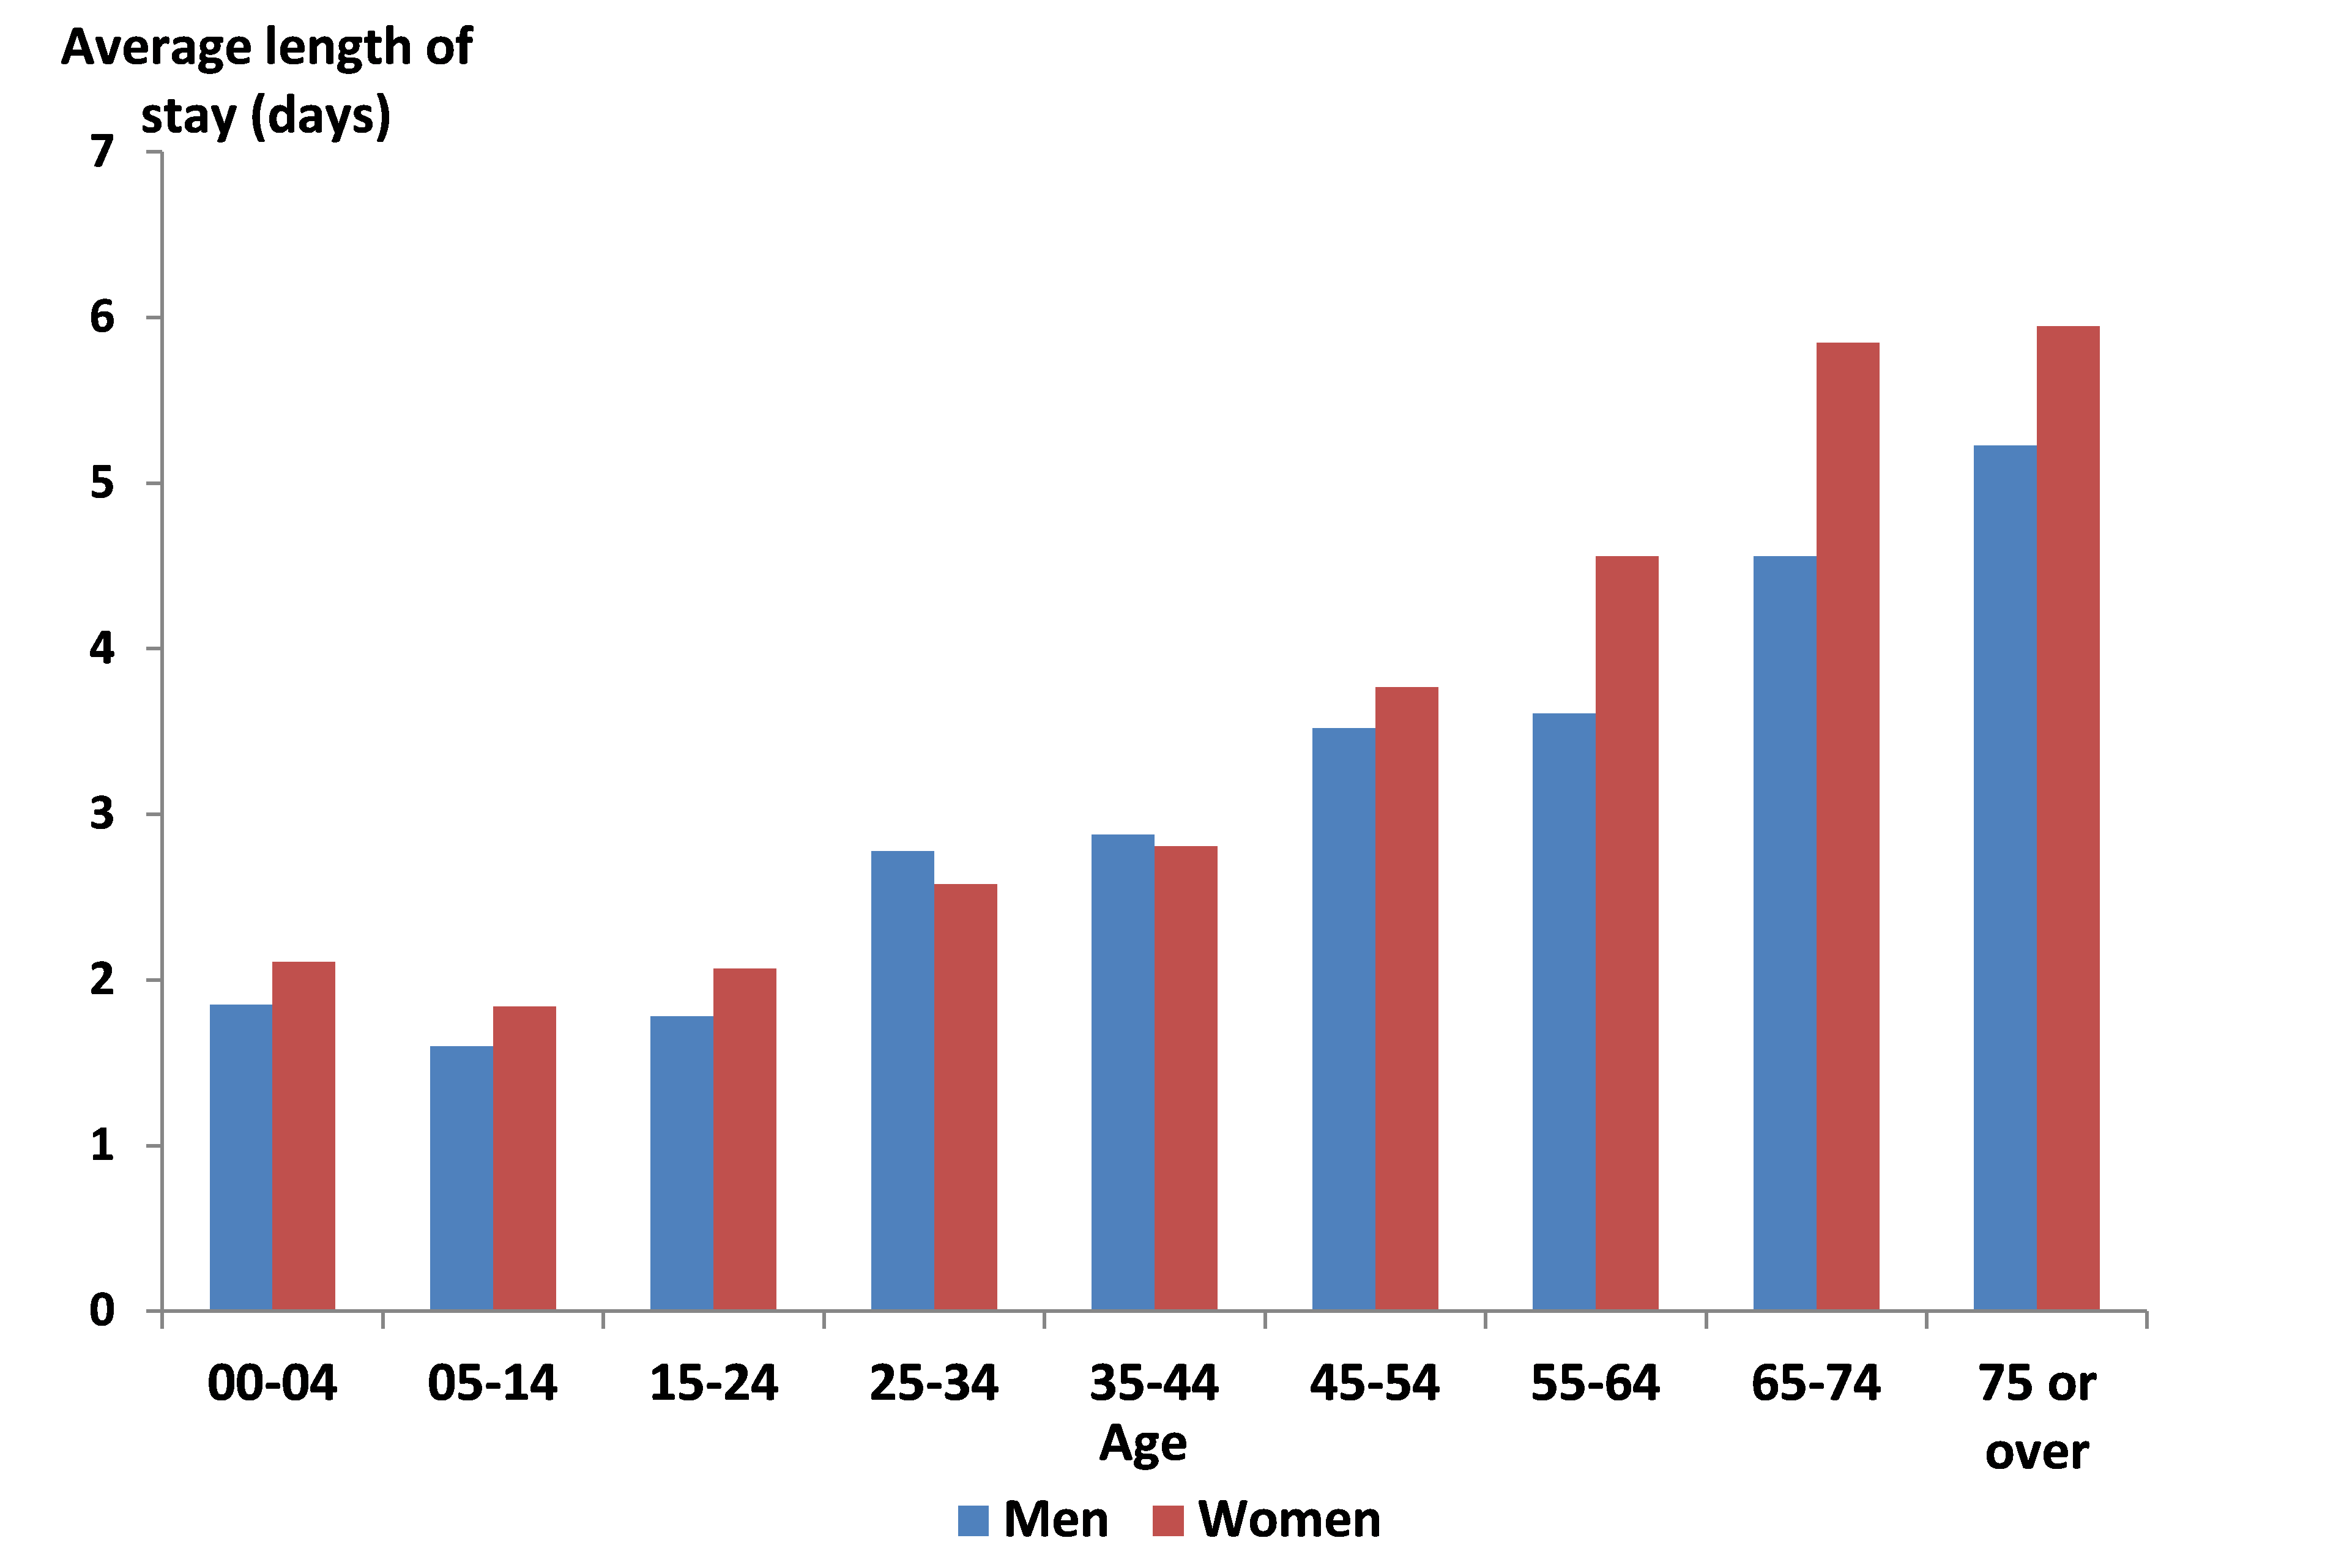 Average length of hospital stay due to asthma in days by age group and sex, 2005 - 2013, Reunion